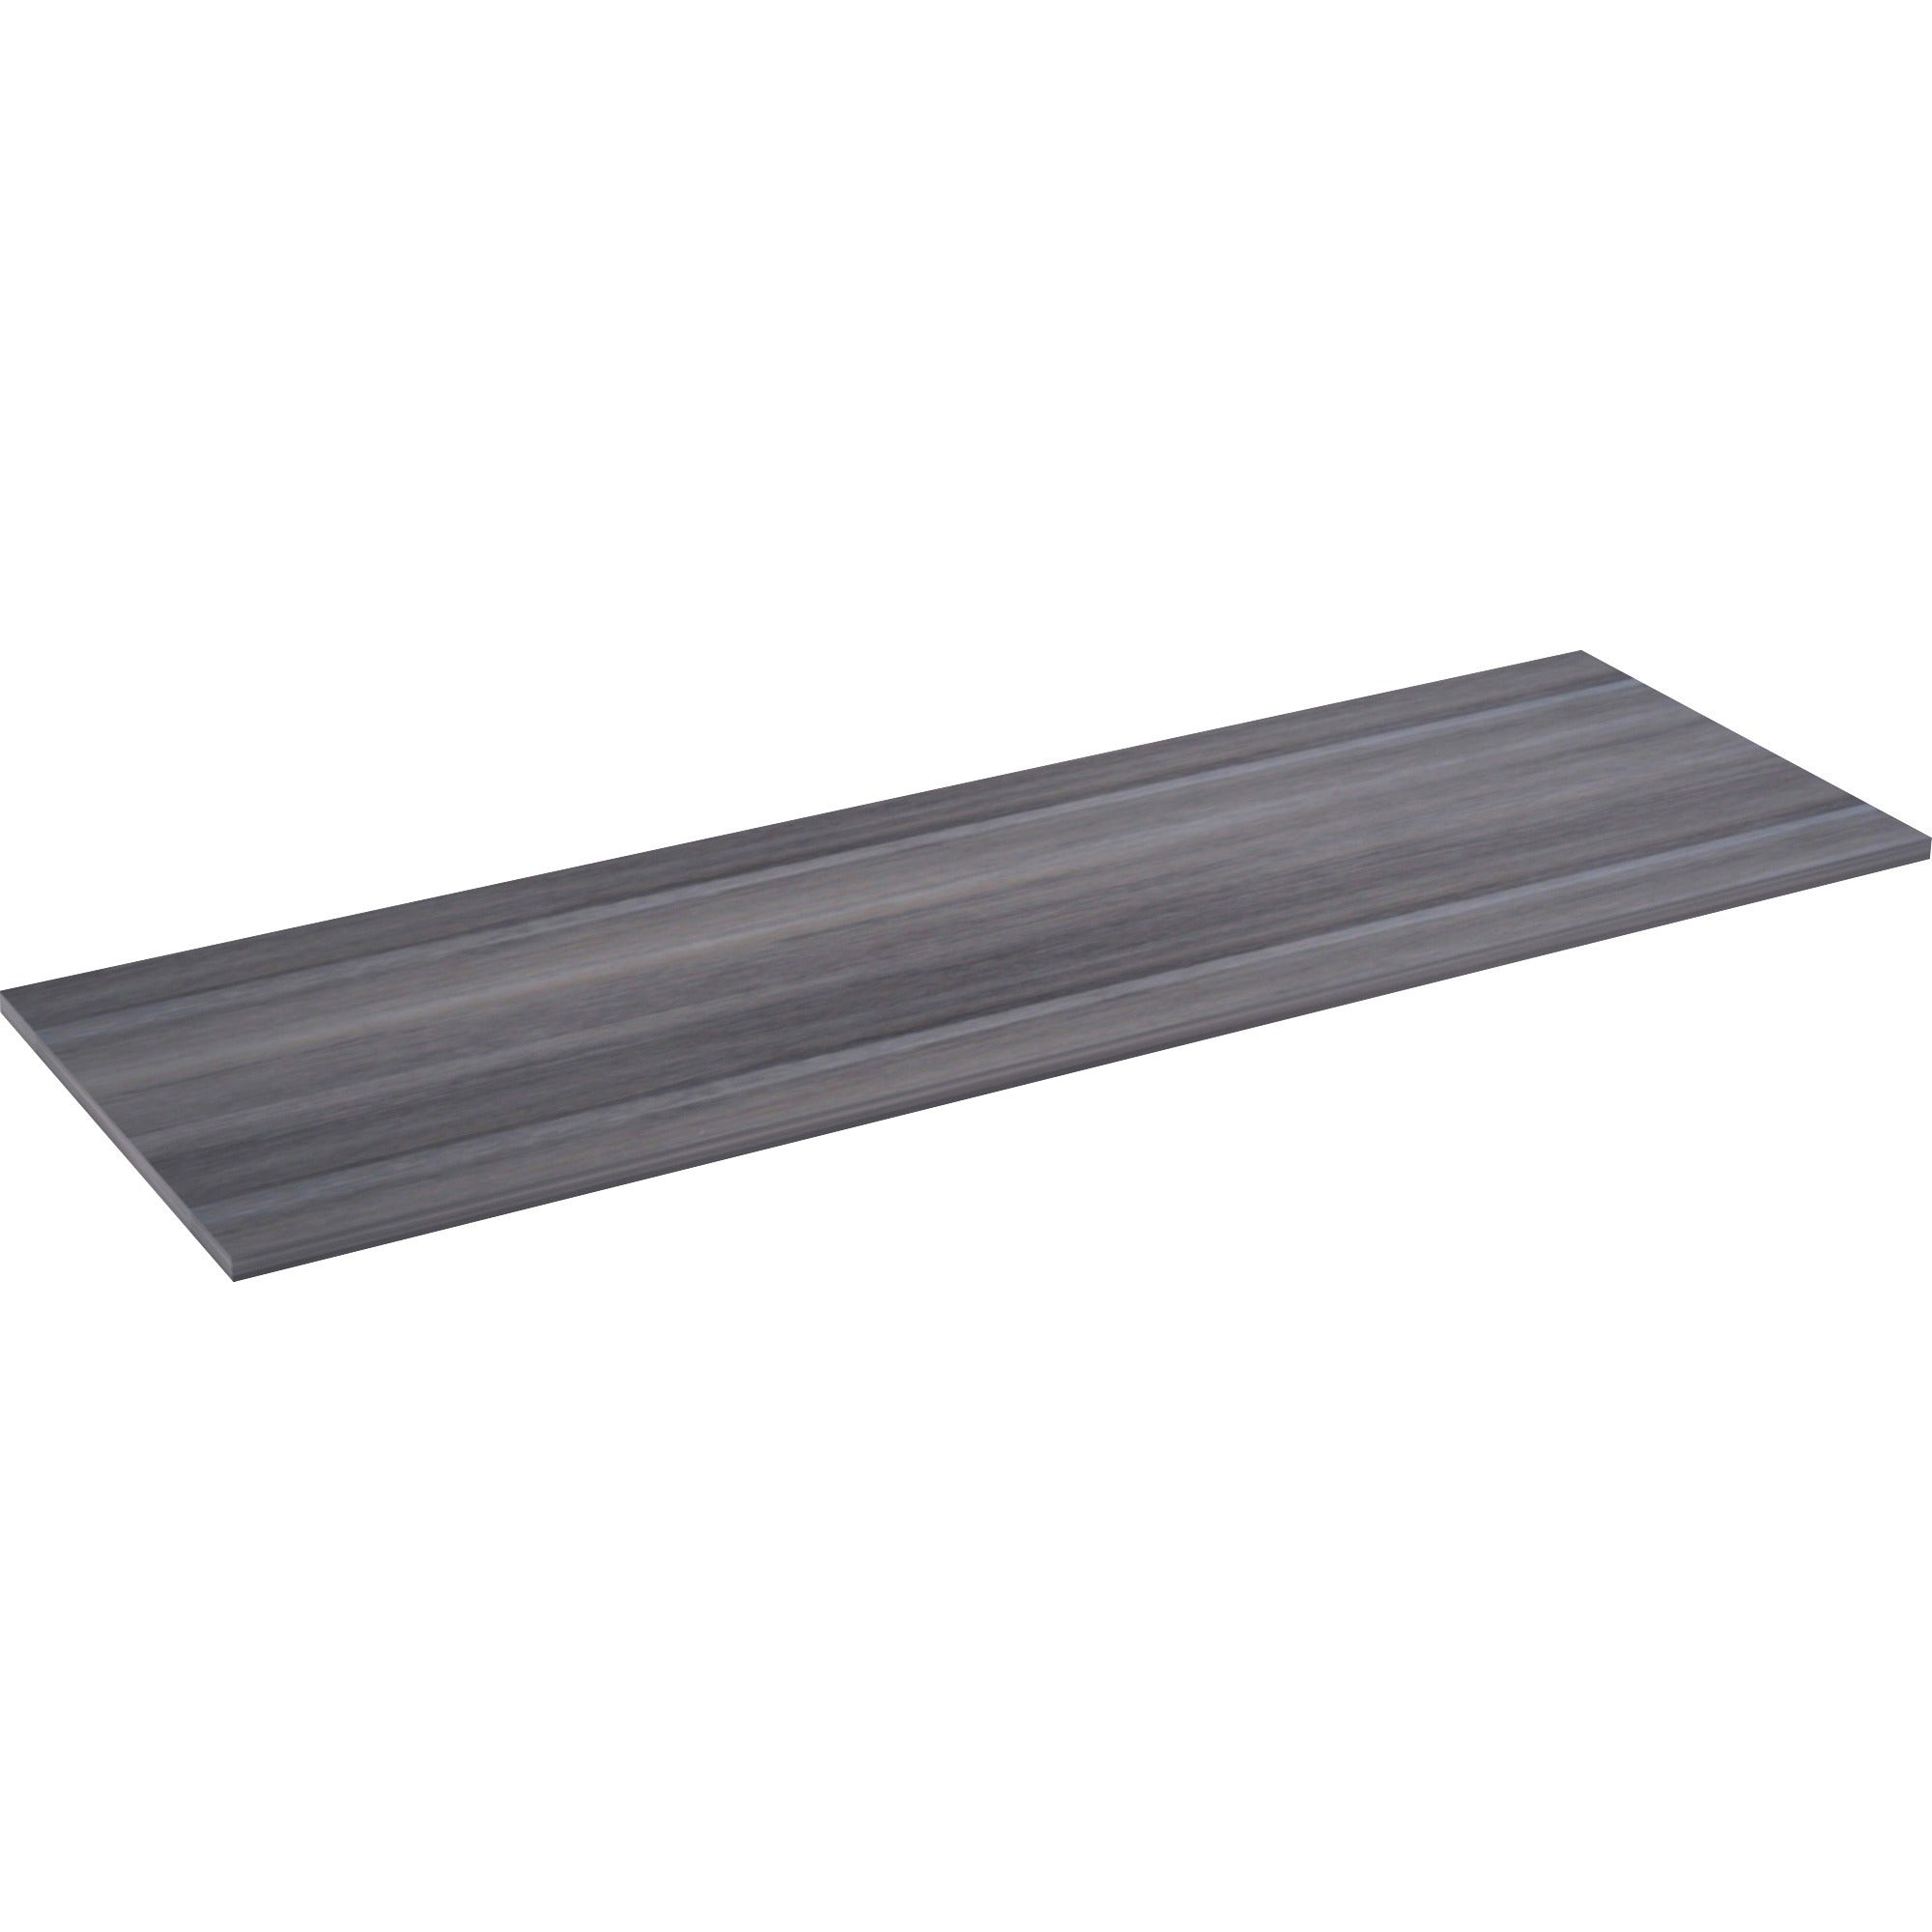 lorell-relevance-series-tabletop-716-x-24-x-1-table-top-straight-edge-finish-charcoal-laminate_llr16199 - 1